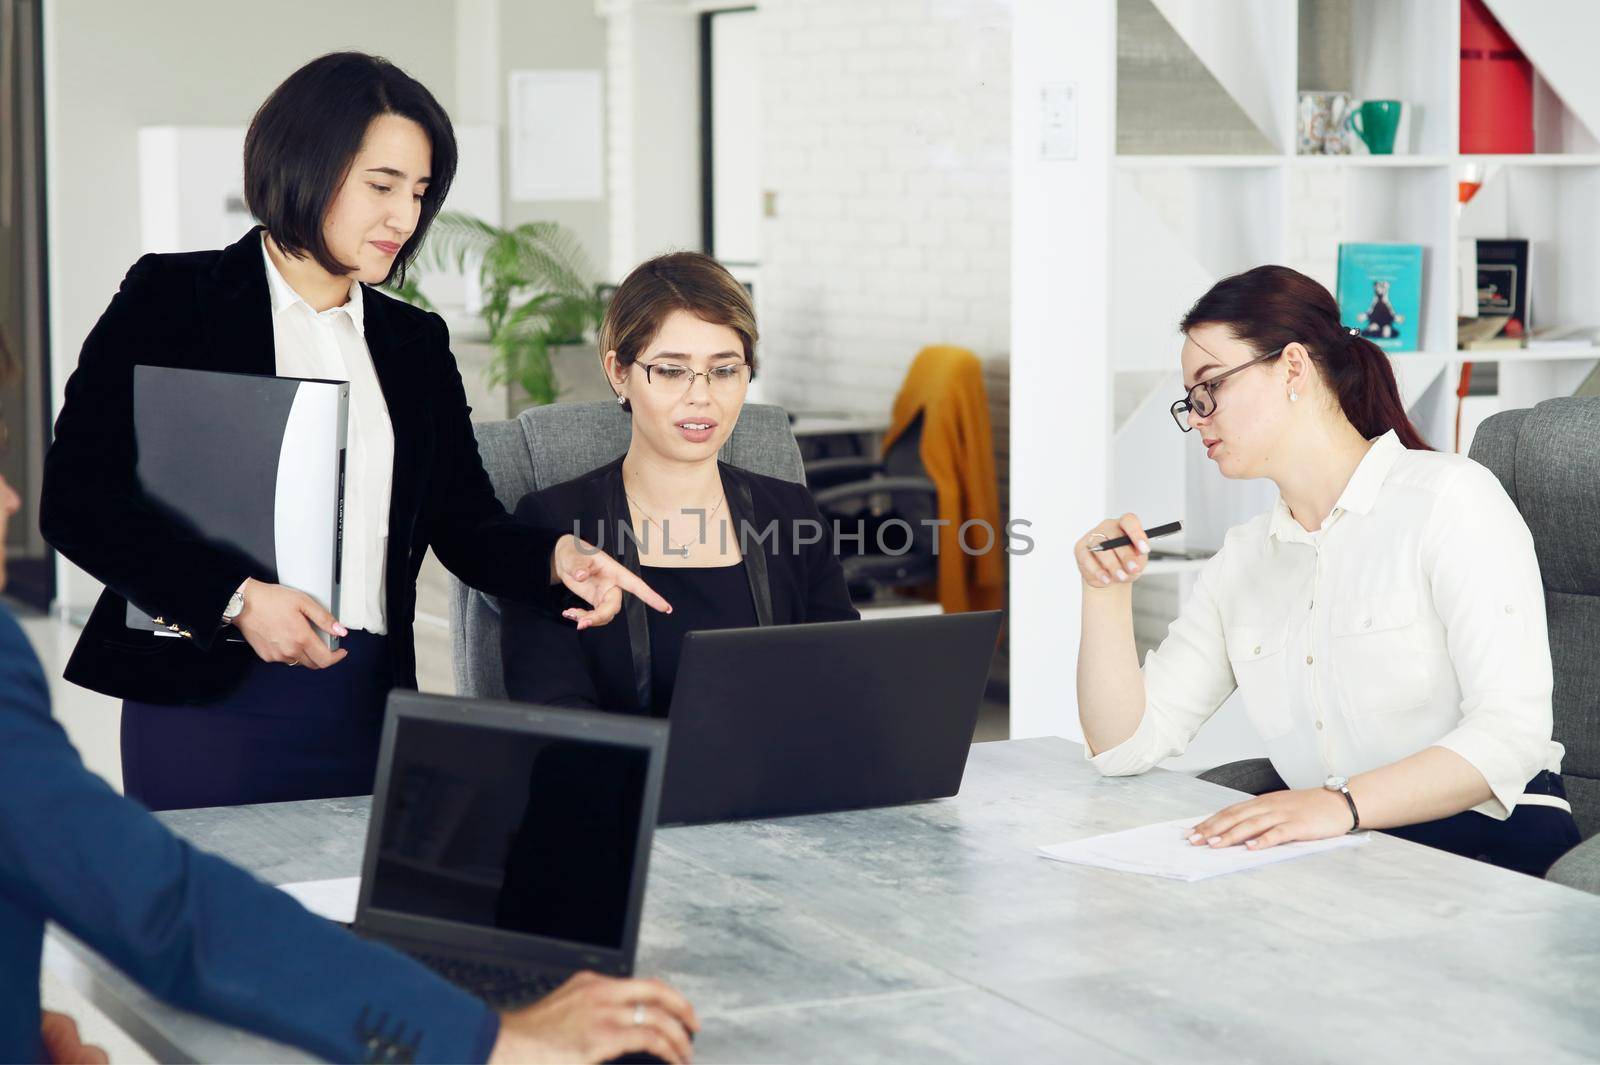 Three young successful business women in the office working together on a project by selinsmo